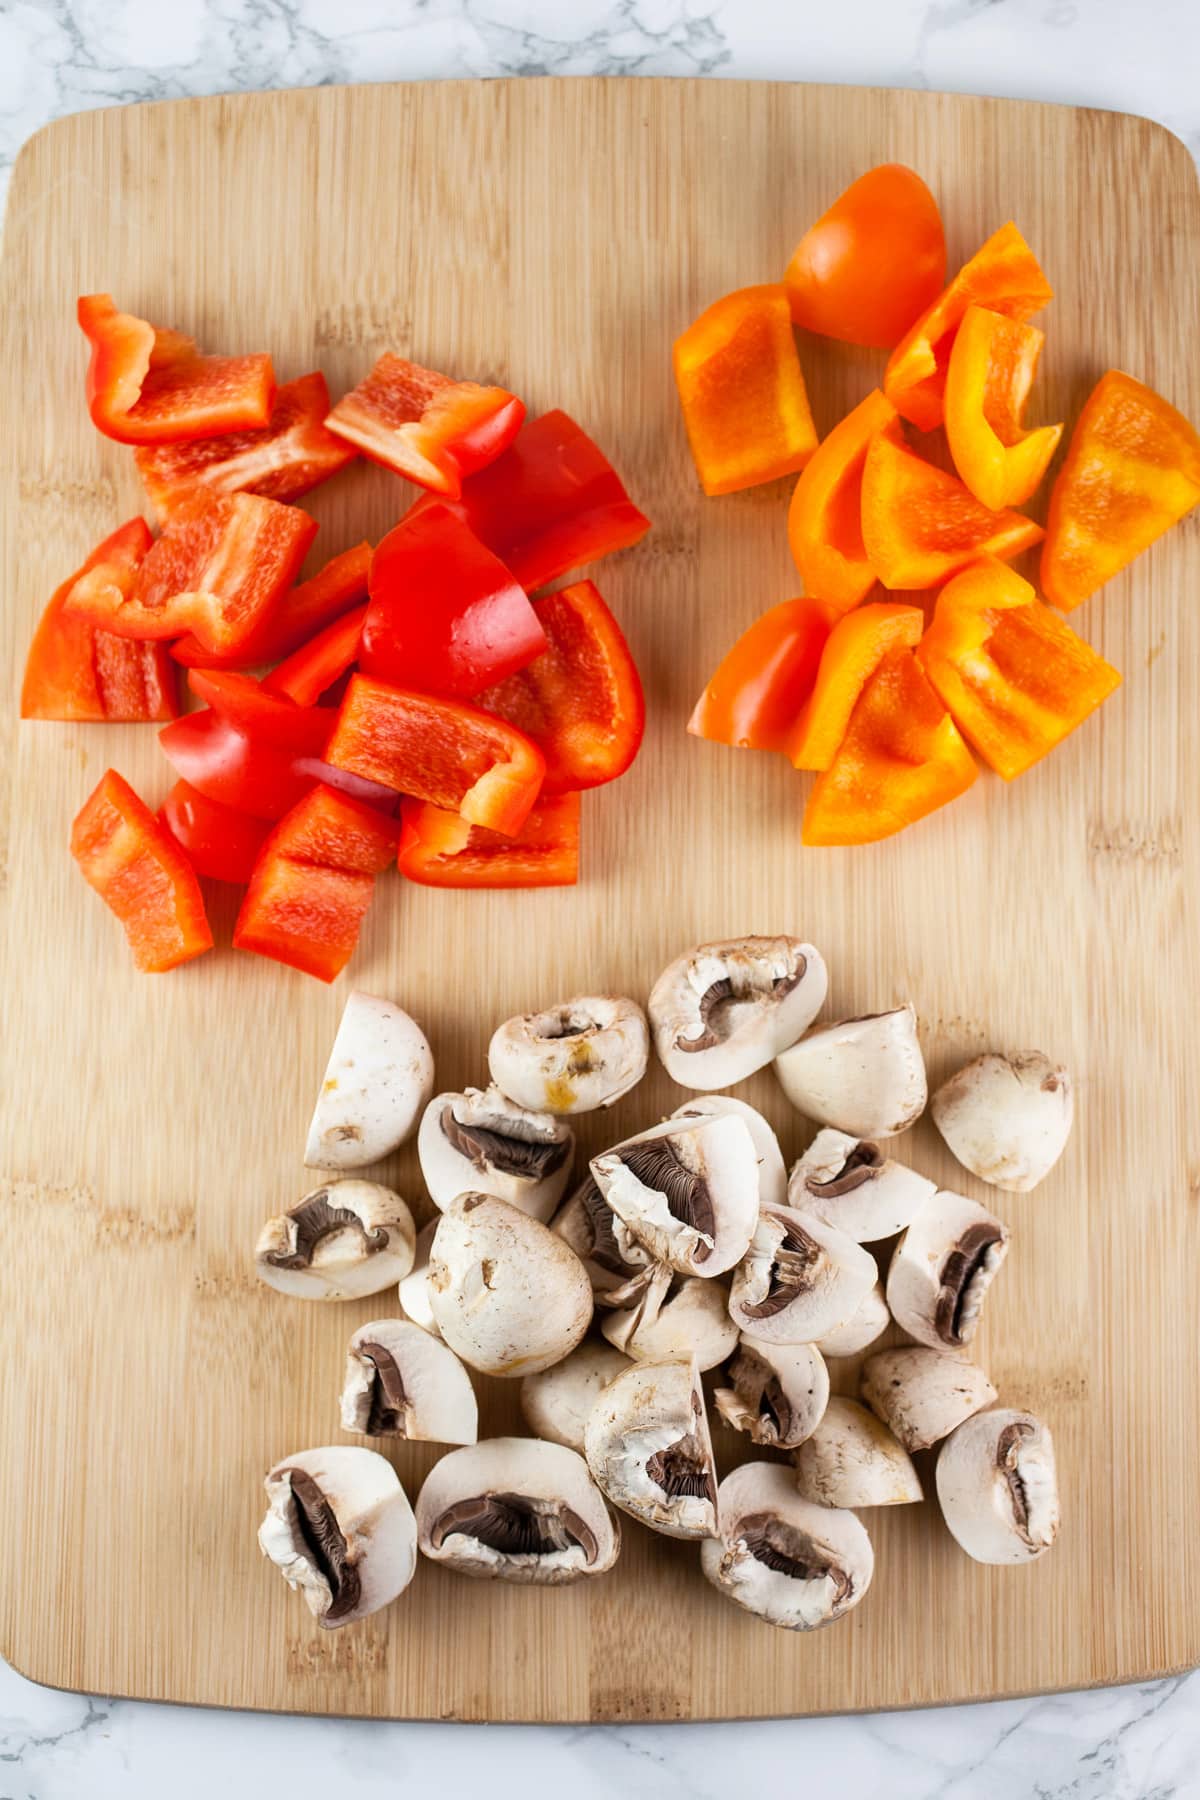 Chopped mushrooms and red and orange bell peppers on wooden cutting board.